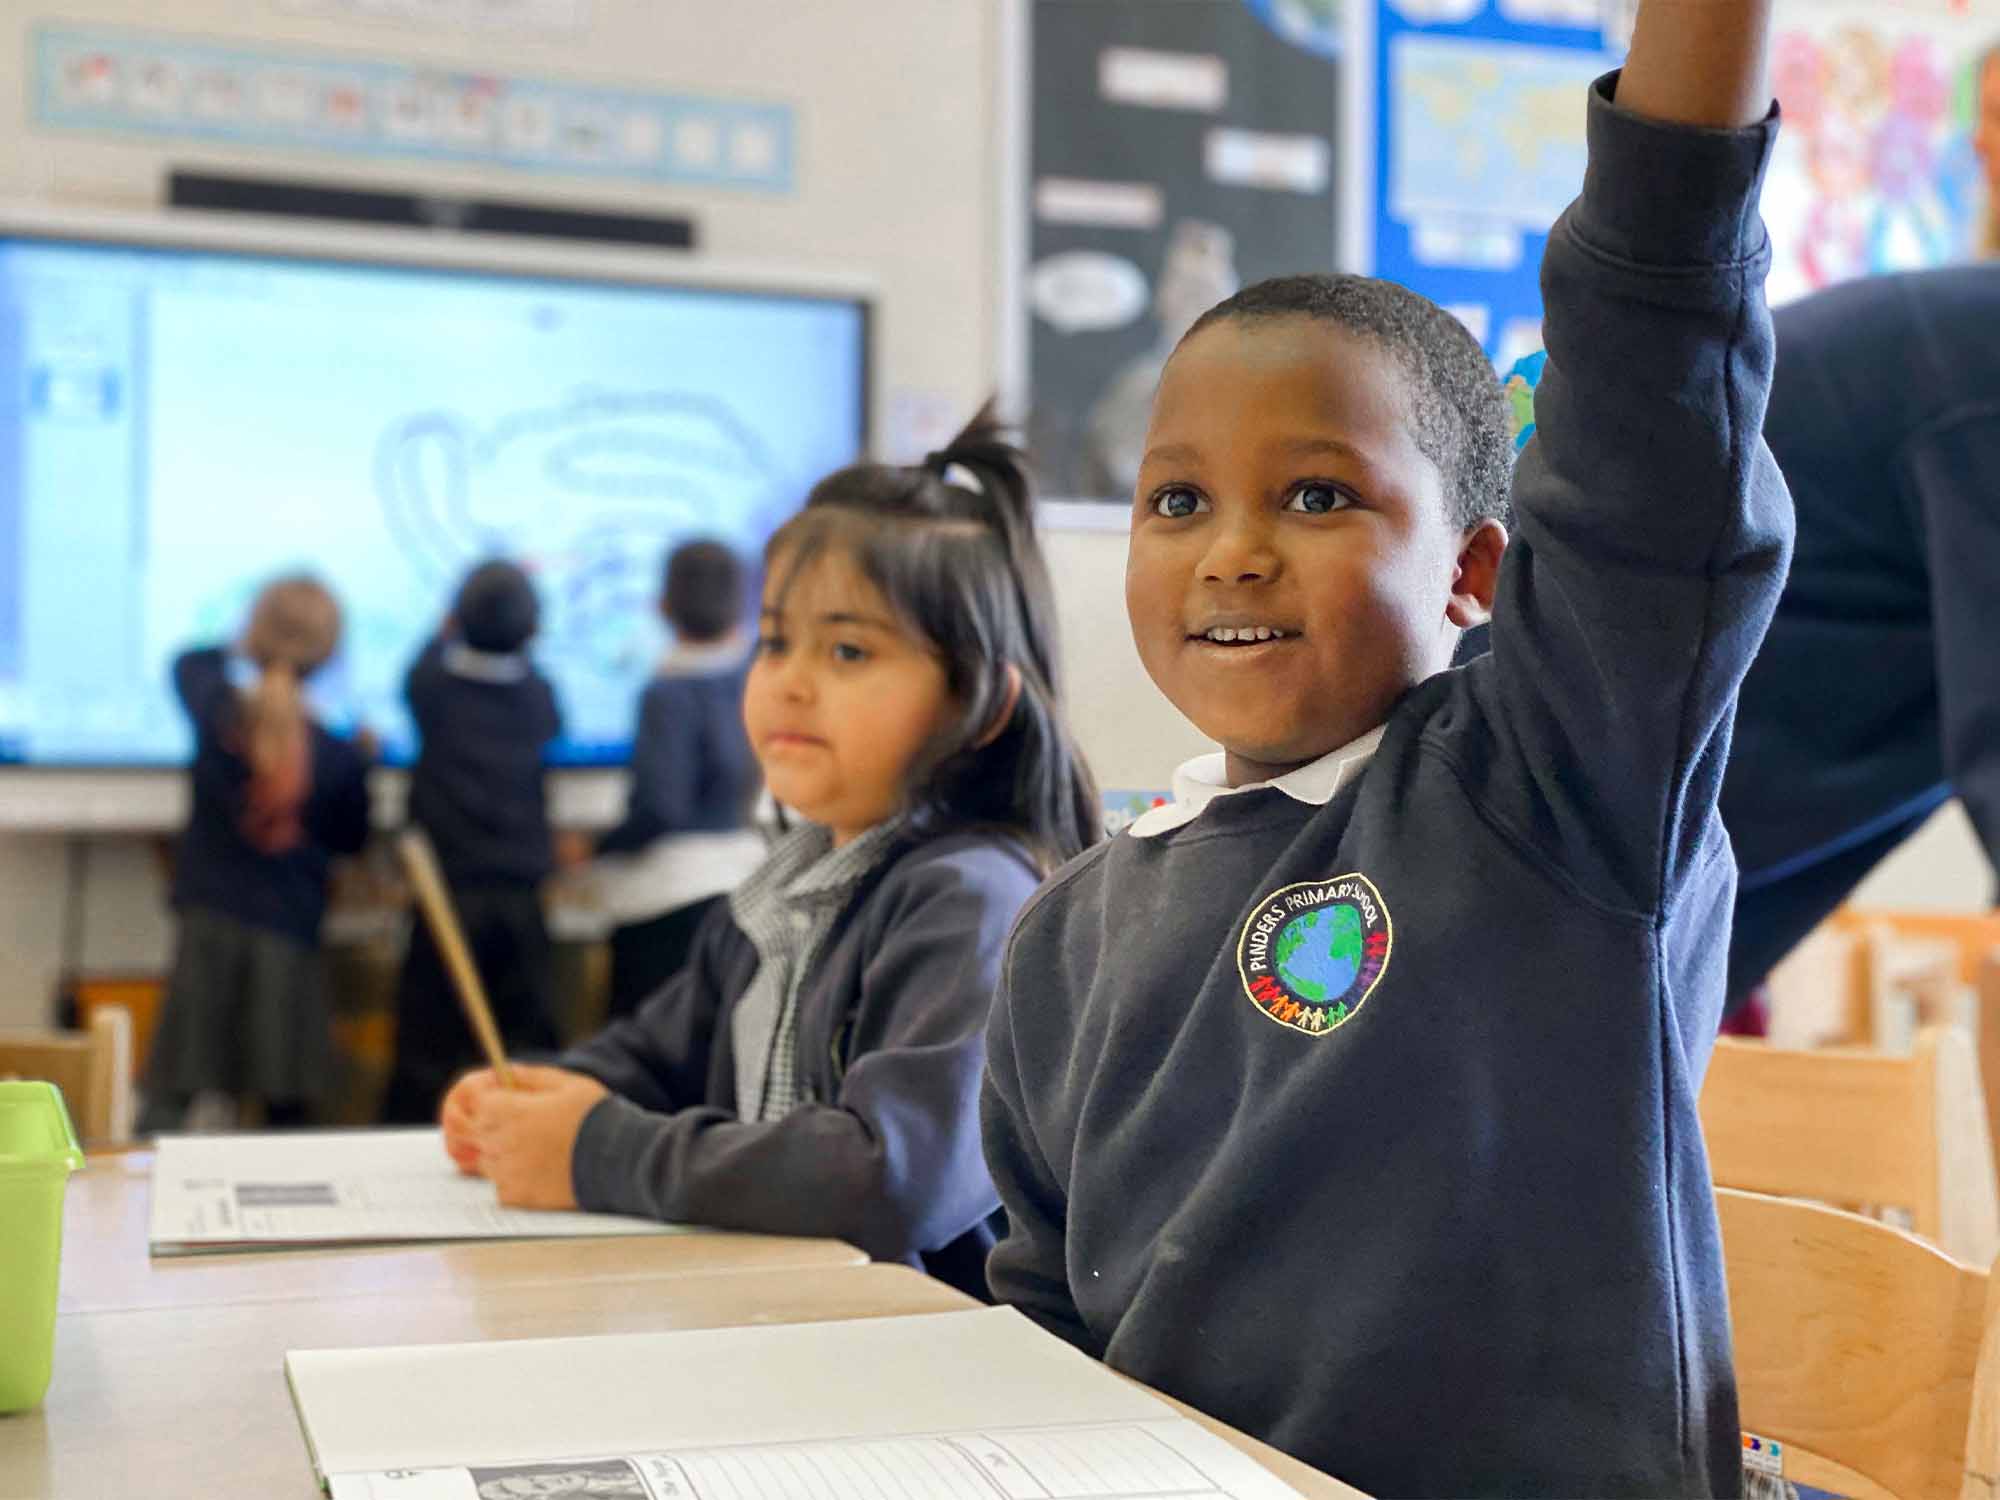 A young boy in a school uniform excitedly raises his hand in a classroom with other students, interacting with a SMART board in the background, demonstrating active learning and engagement with technology.